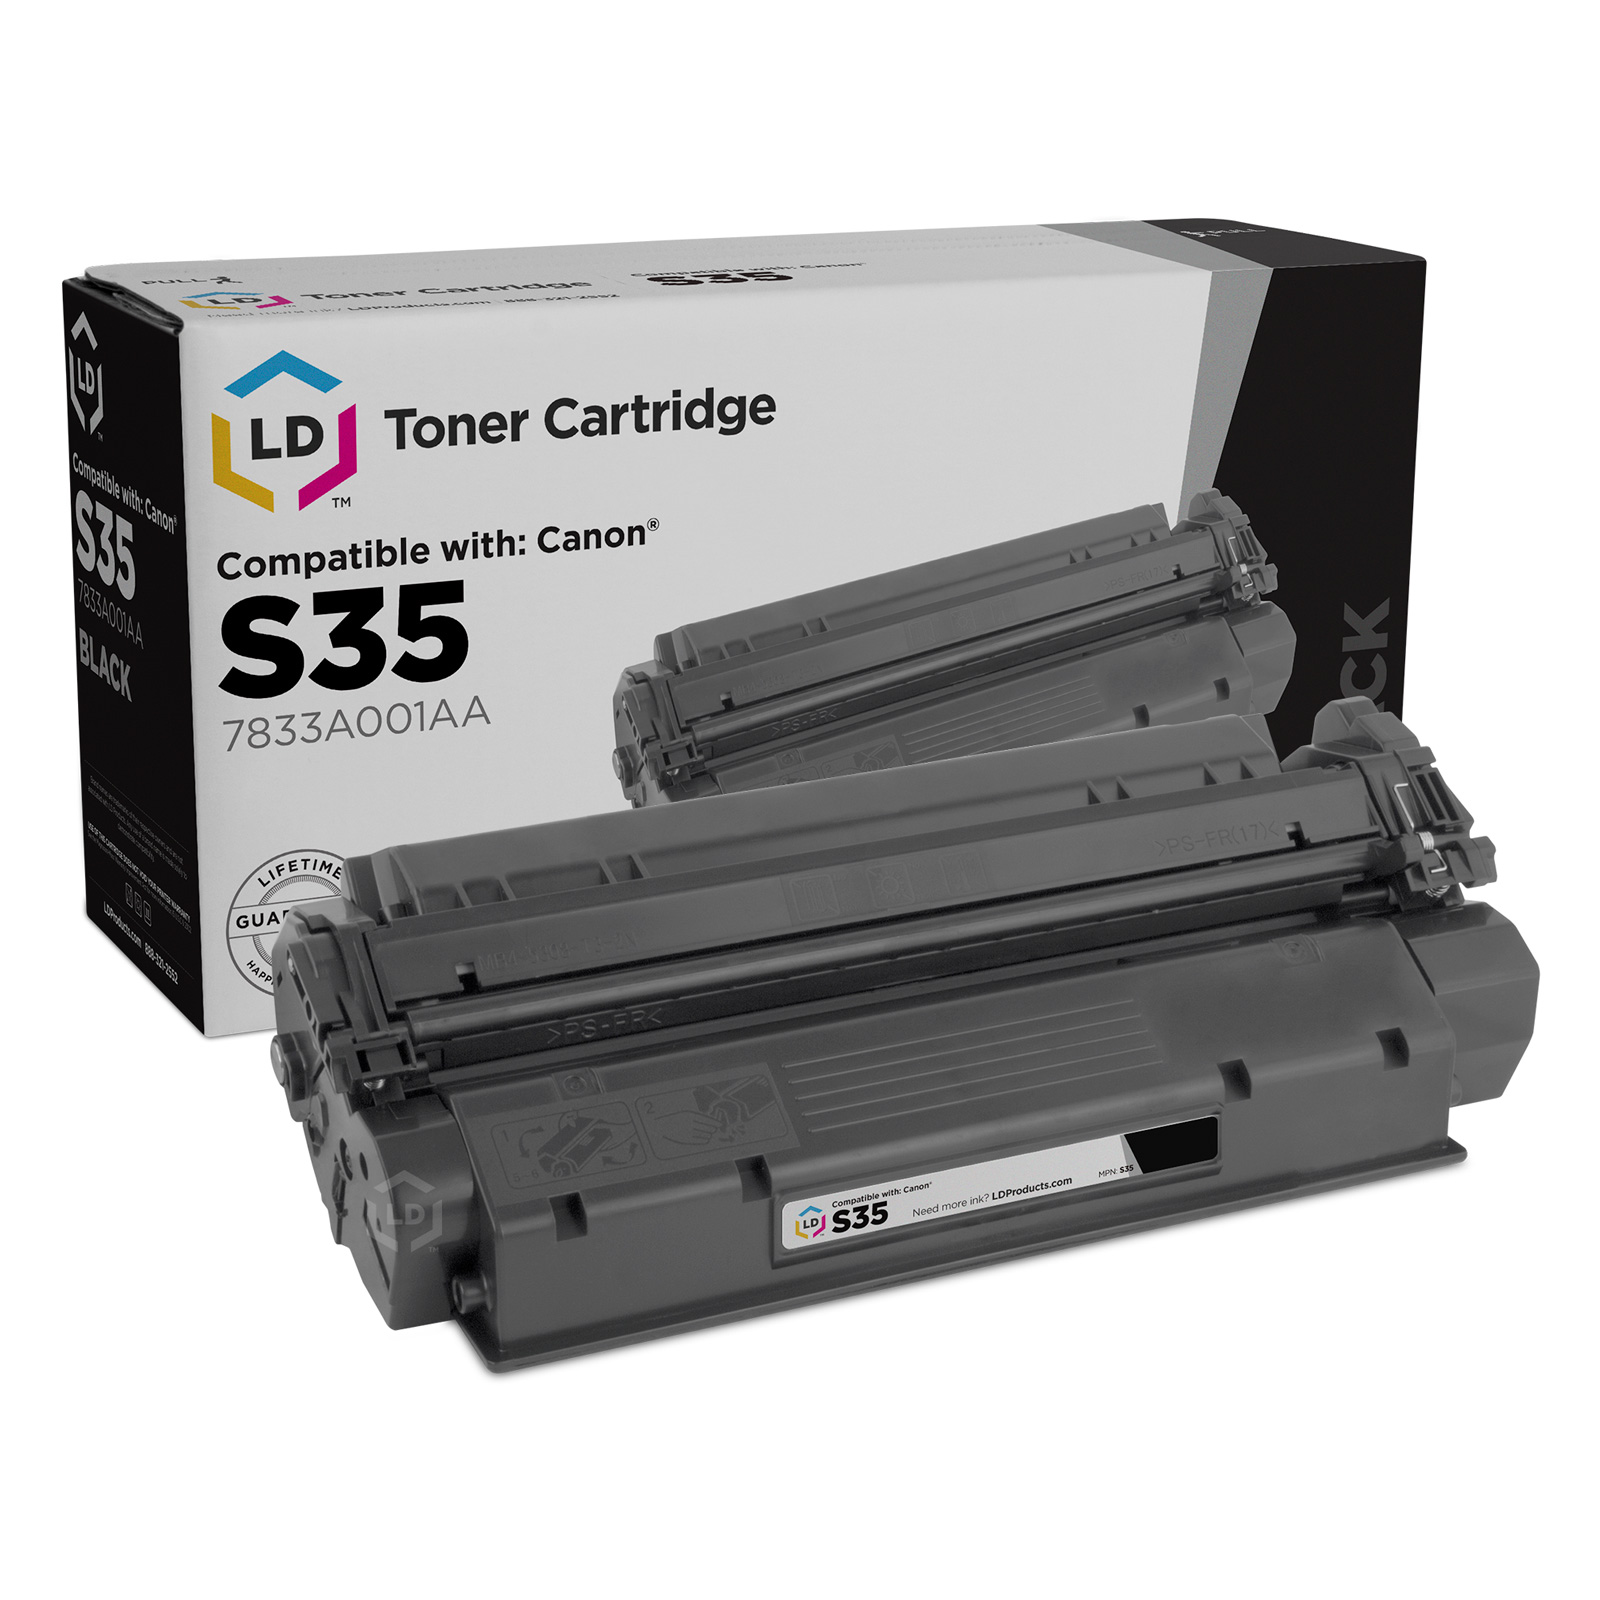 Remanufactured Replacement for Canon S35 7833A001AA Black Toner Cartridge for ICD-340, D320, D340, D383, L170 - image 1 of 1